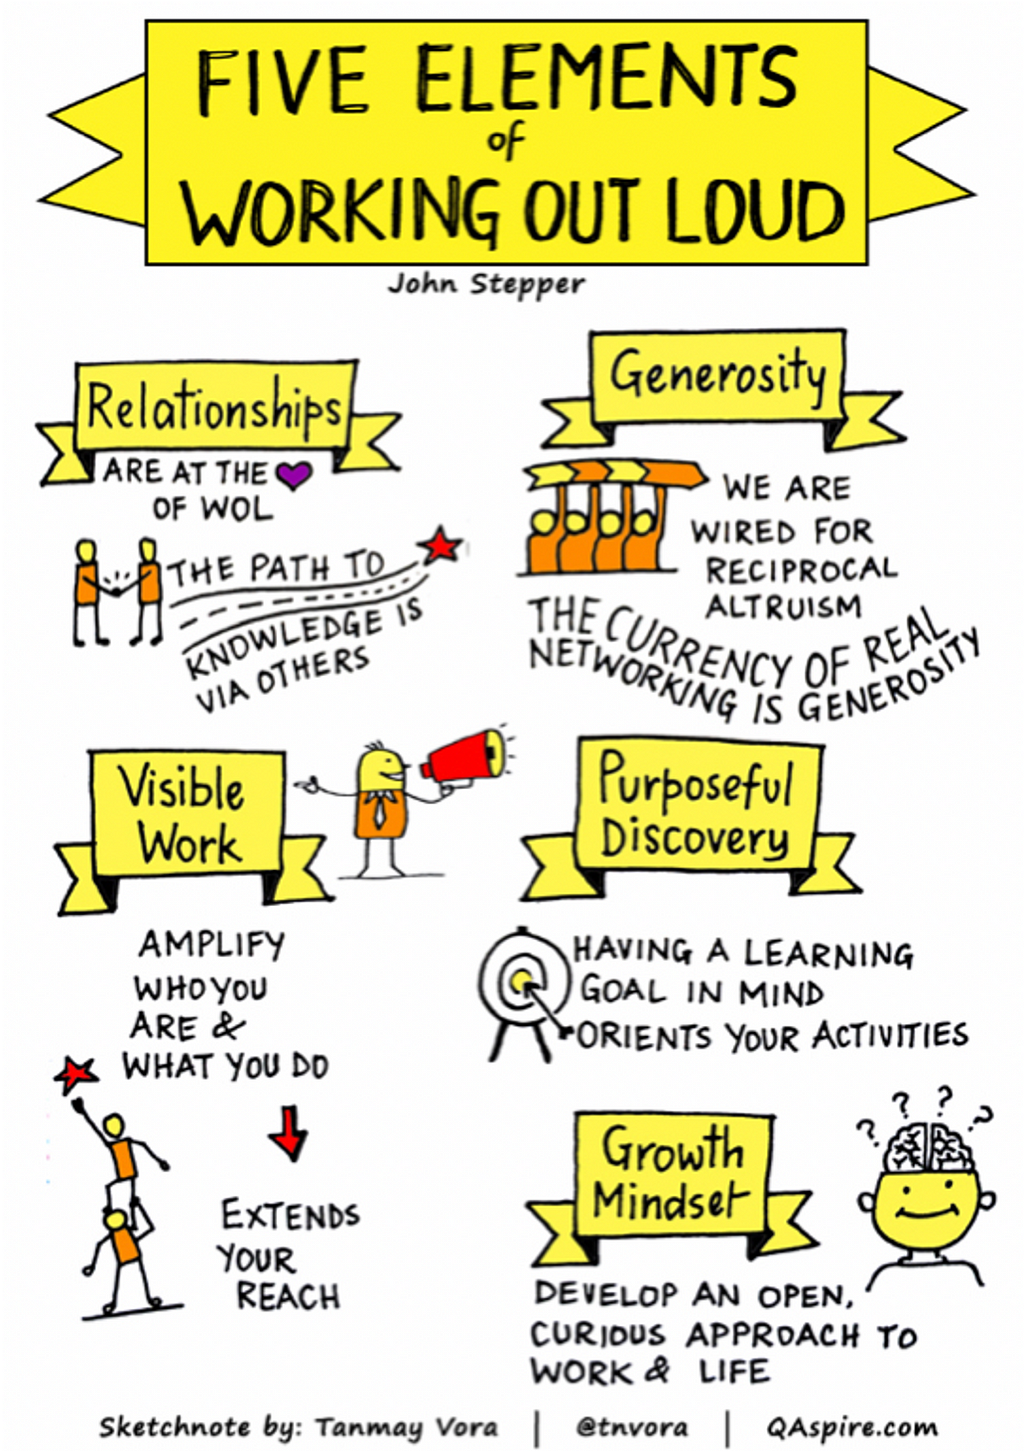 The 5 elements of WOL